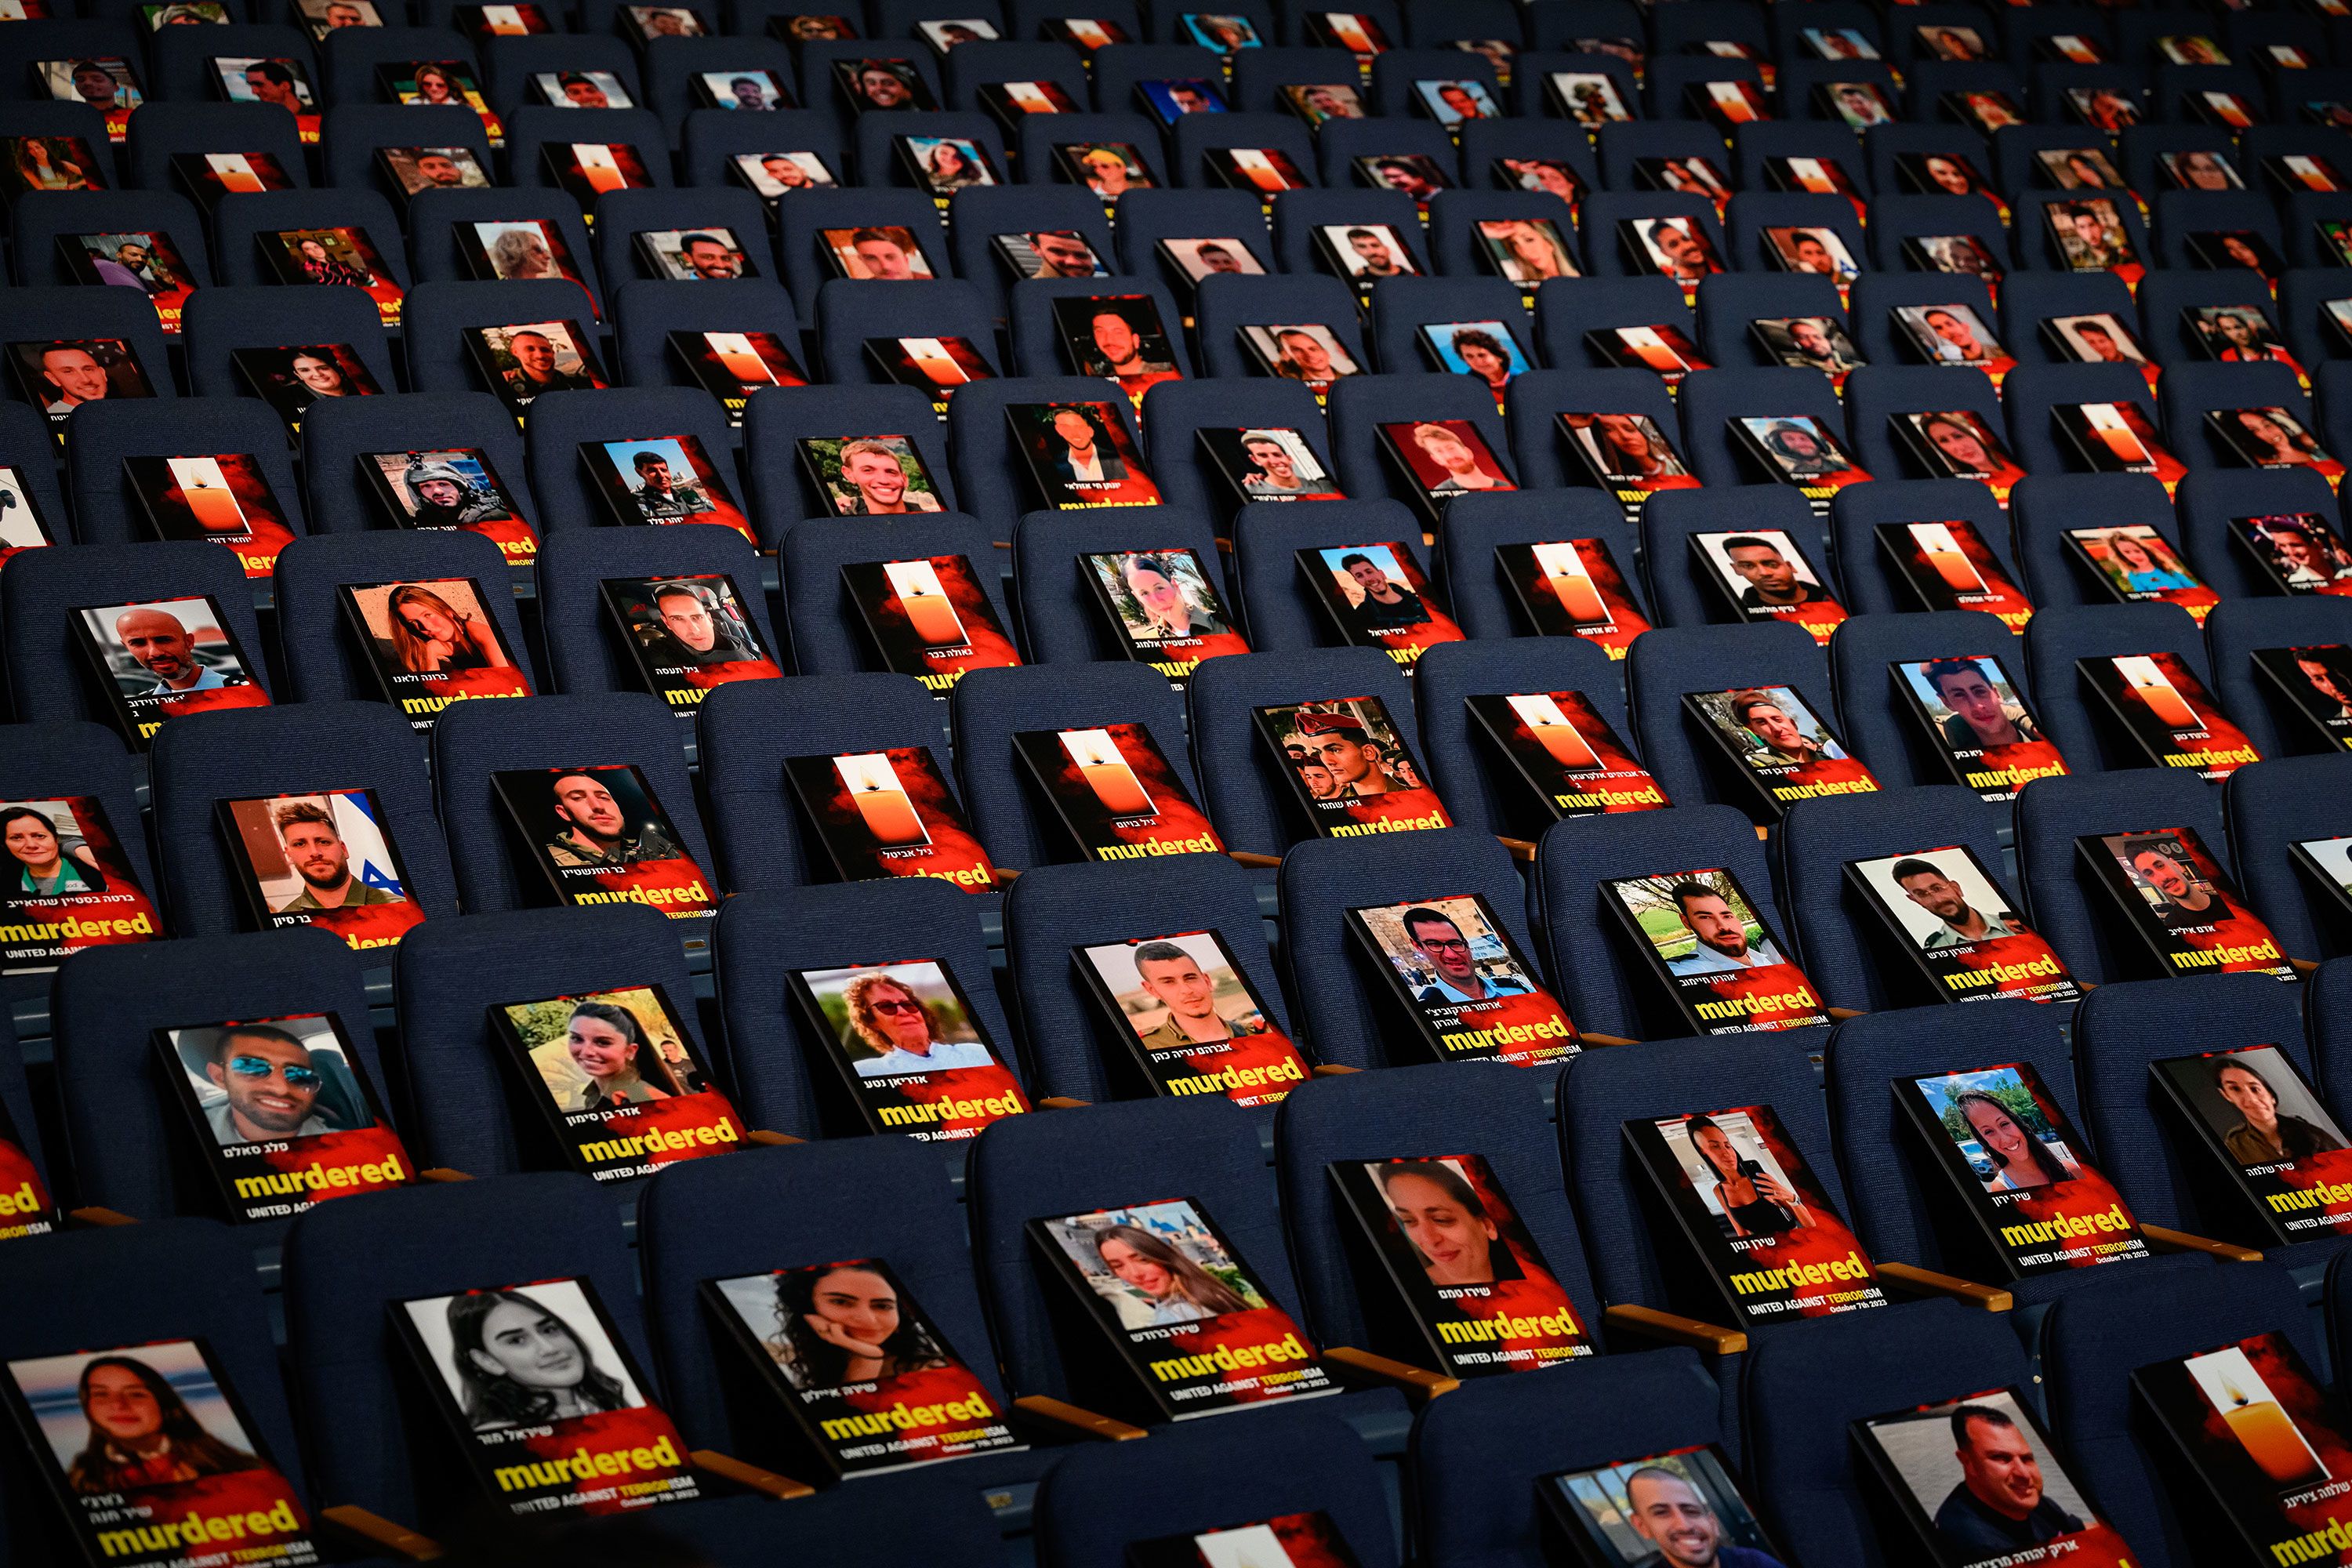 Pictures of over 1,000 people abducted, missing or killed in the Hamas attack are displayed on empty seats in the Smolarz Auditorium at Tel Aviv University in Tel Aviv, Israel, on October 22.